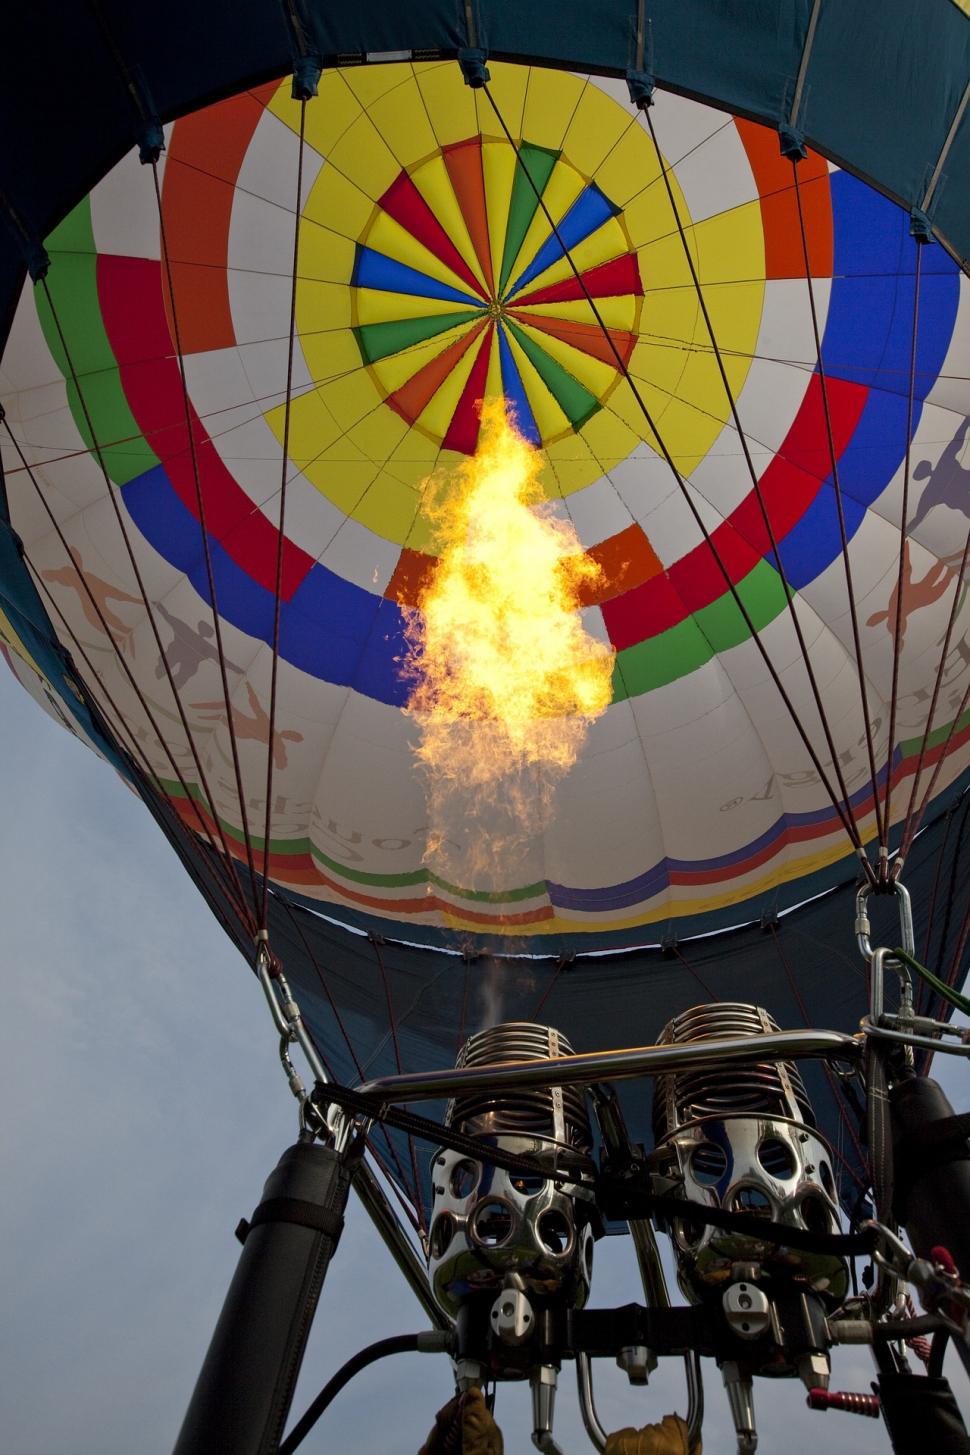 Free Image of Colorful Hot Air Balloon With Flame 